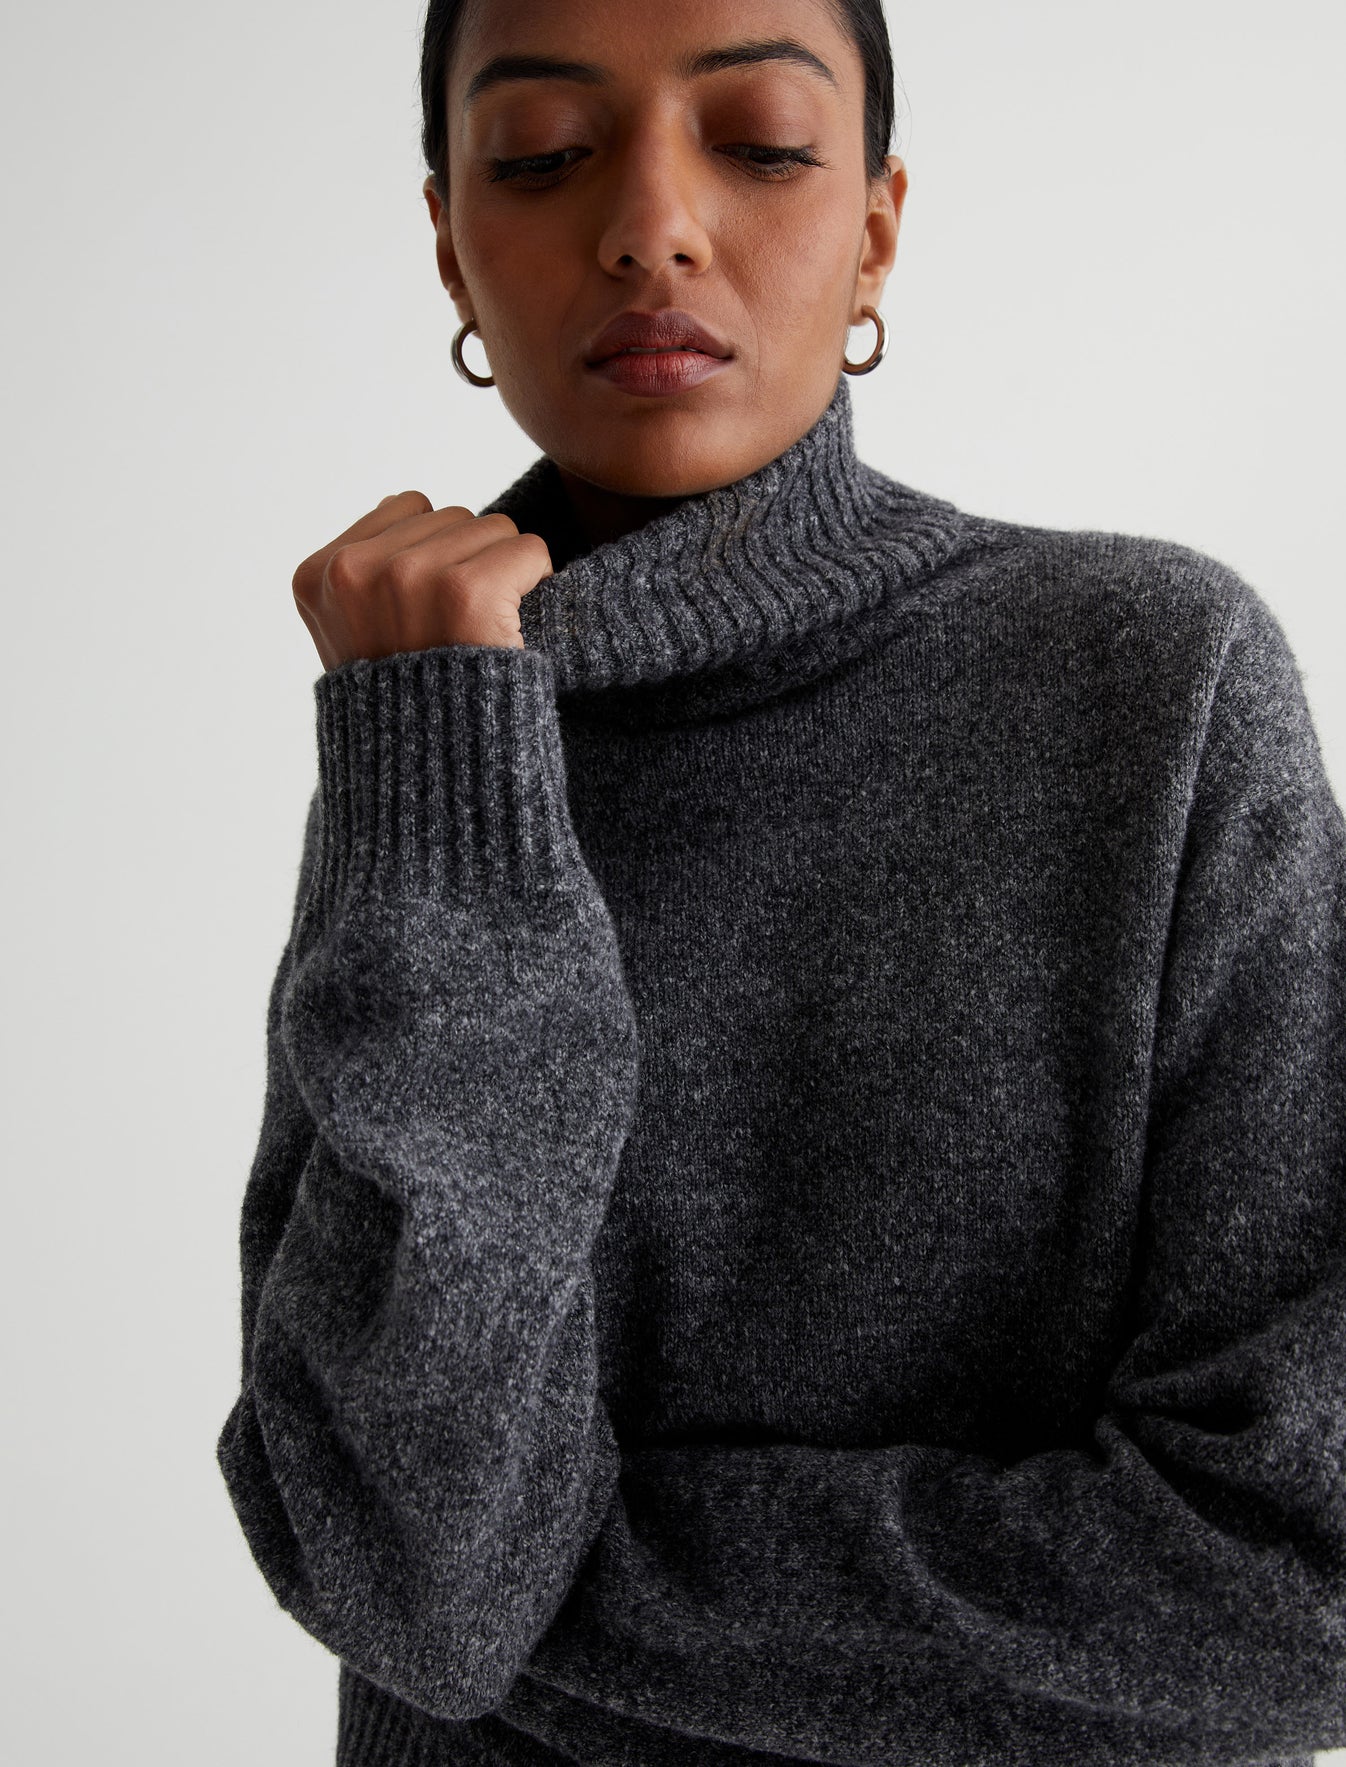 Bellona Heather Charcoal Relaxed Turtleneck Sweater Photo 3